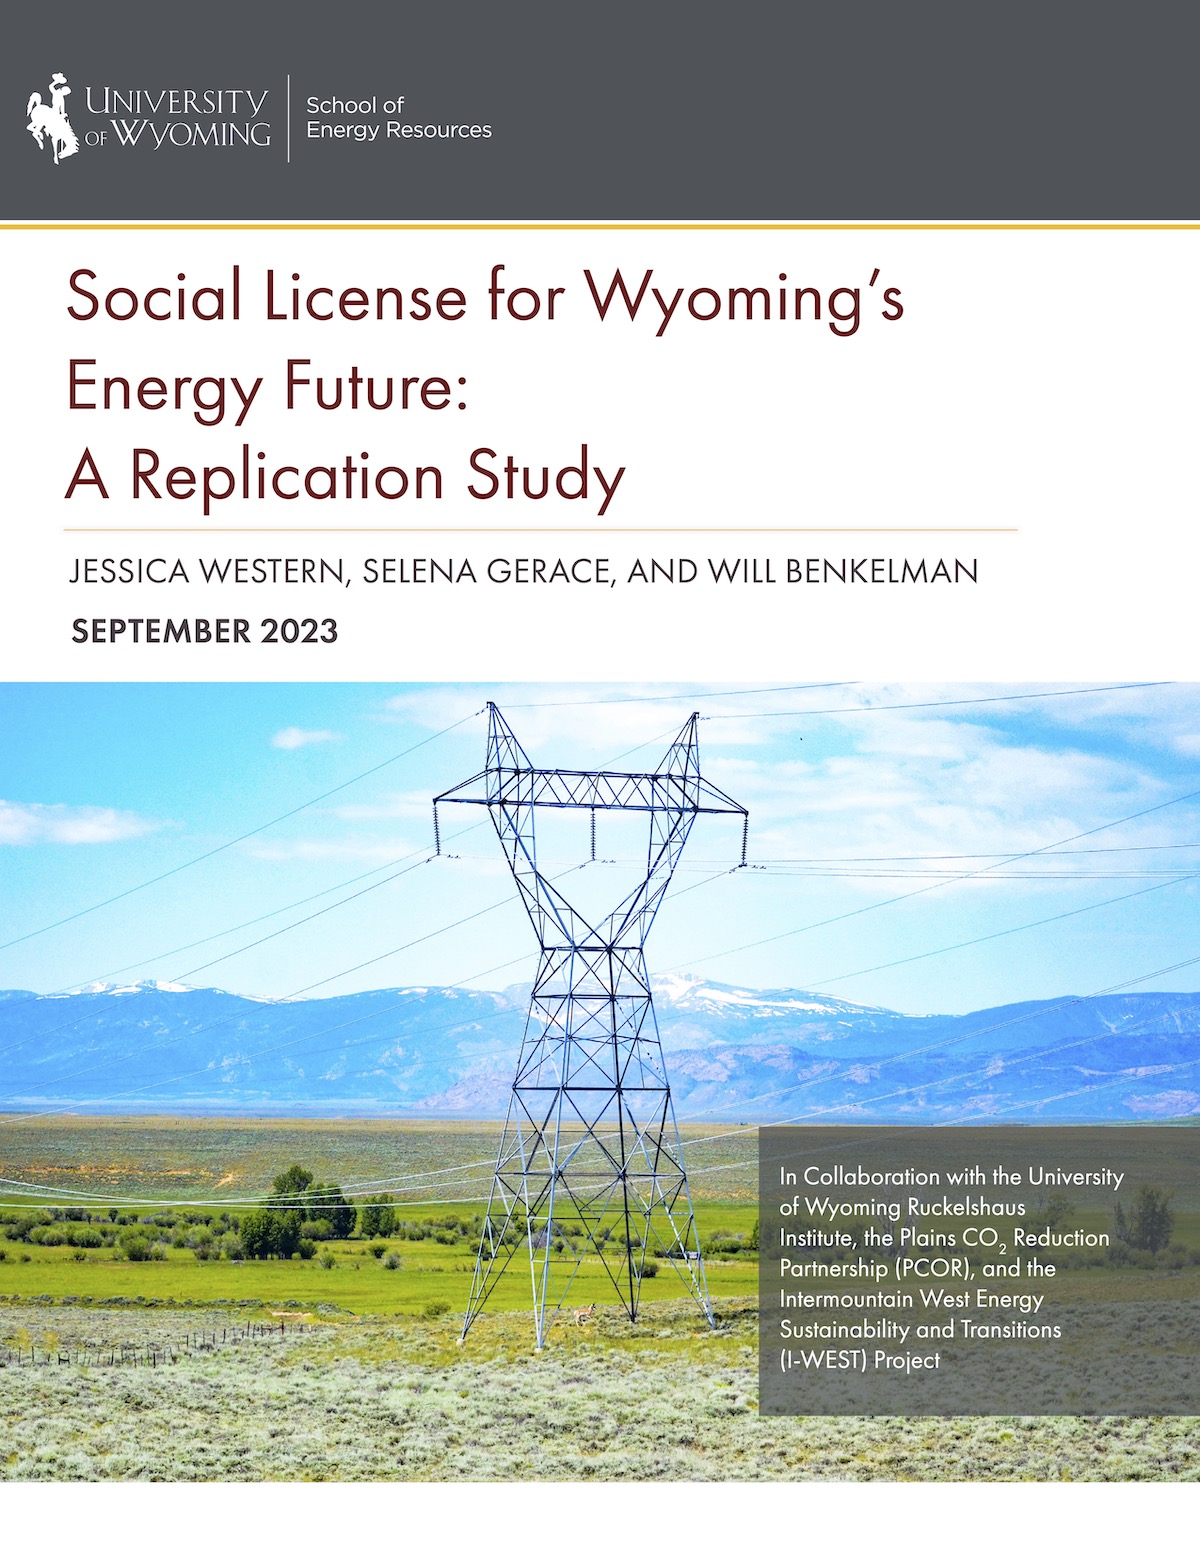 Cover of report with image of power line in front of mountains.